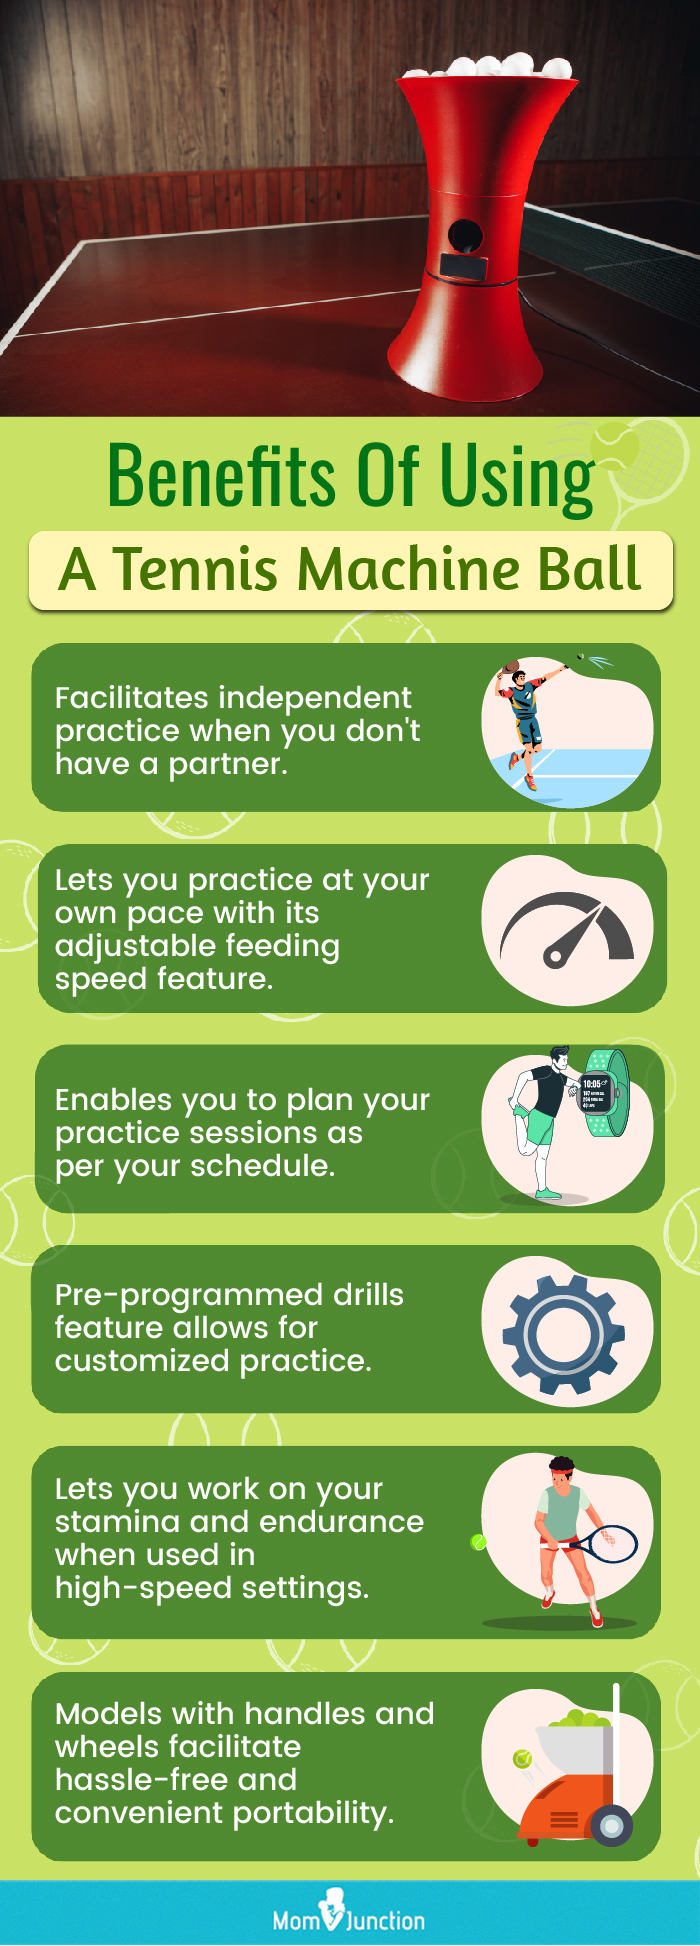 Benefits Of Using A Tennis Machine Ball (infographic)